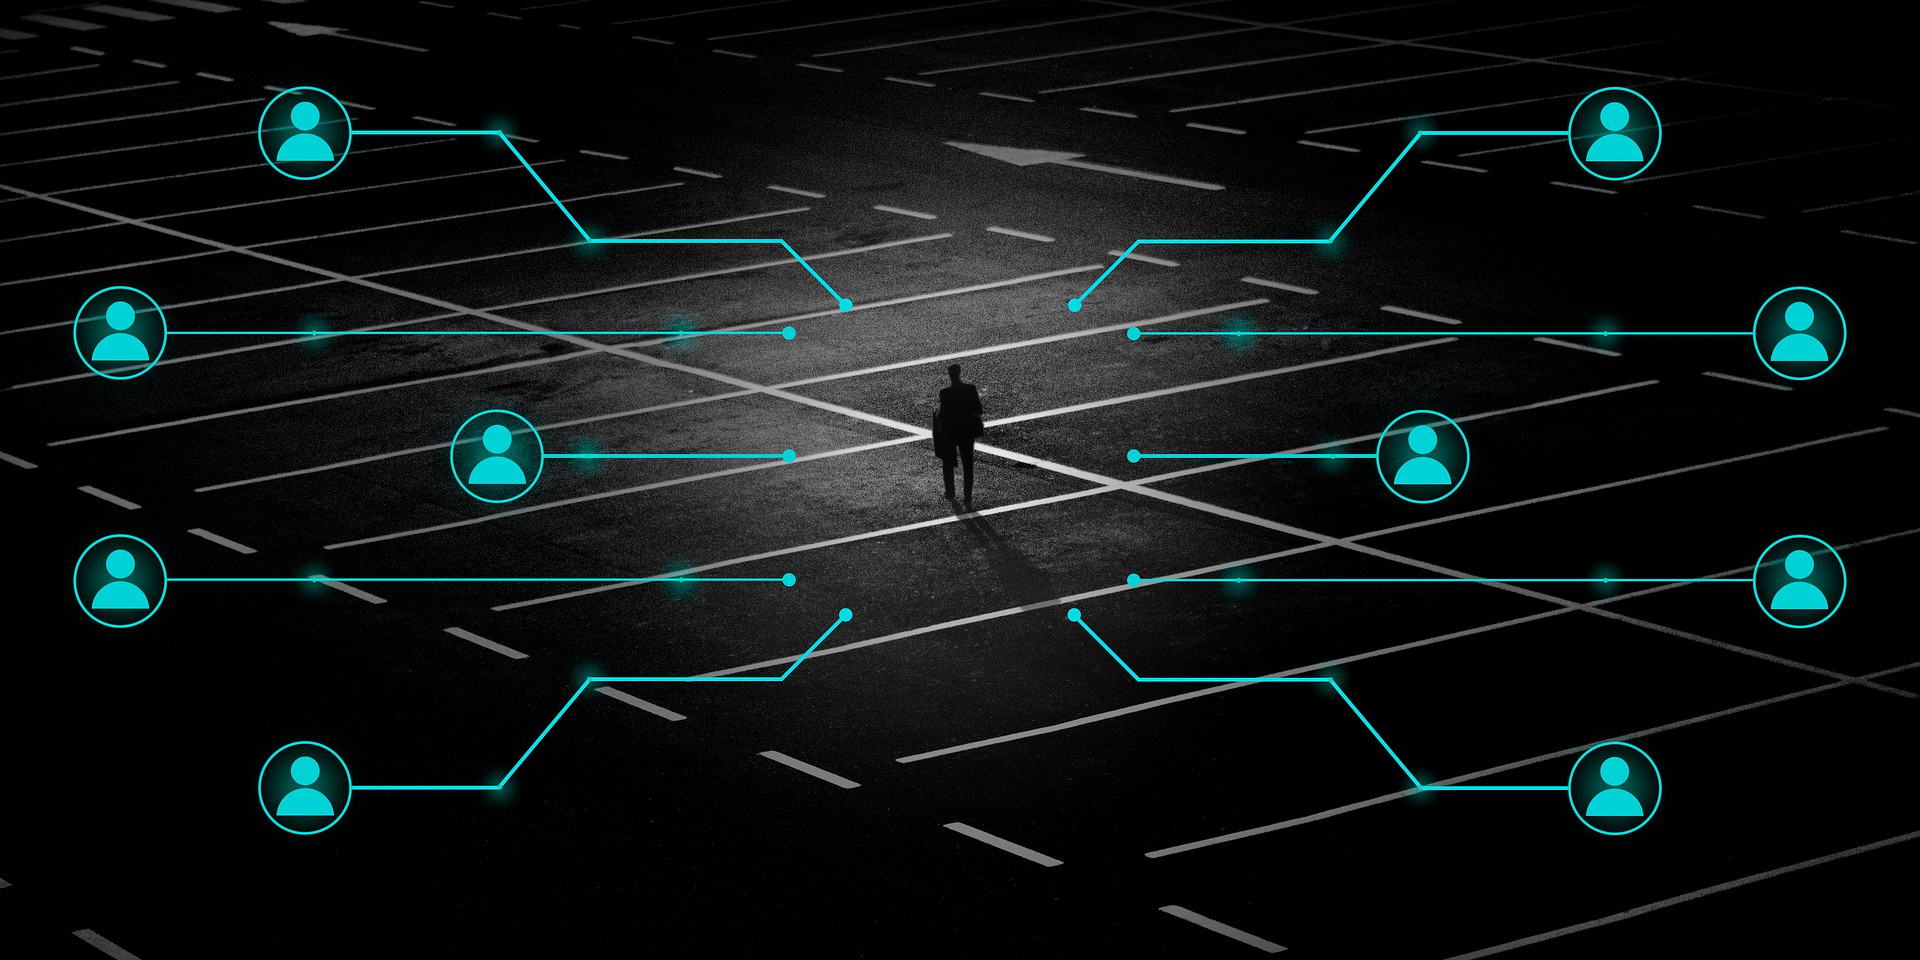 A person walks through a dark parking lot surrounded by digital lines as if they're extracting data from them